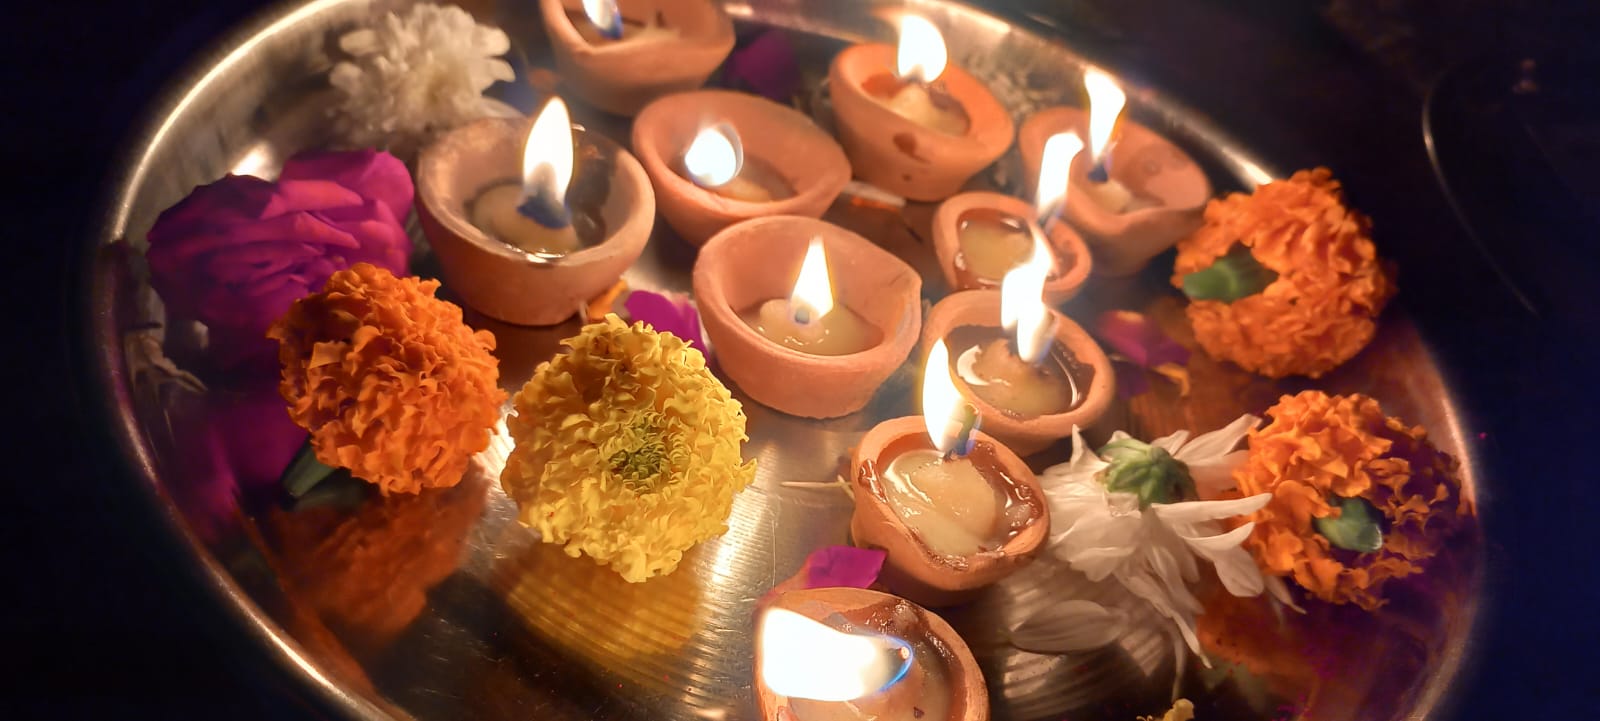 Lit ghee lamps are carried on a silver puja thali (ceremonial plate for ritual worship) decorated with chrysanthemums for the Tulsi Vivah festival on Nov. 5, 2022.